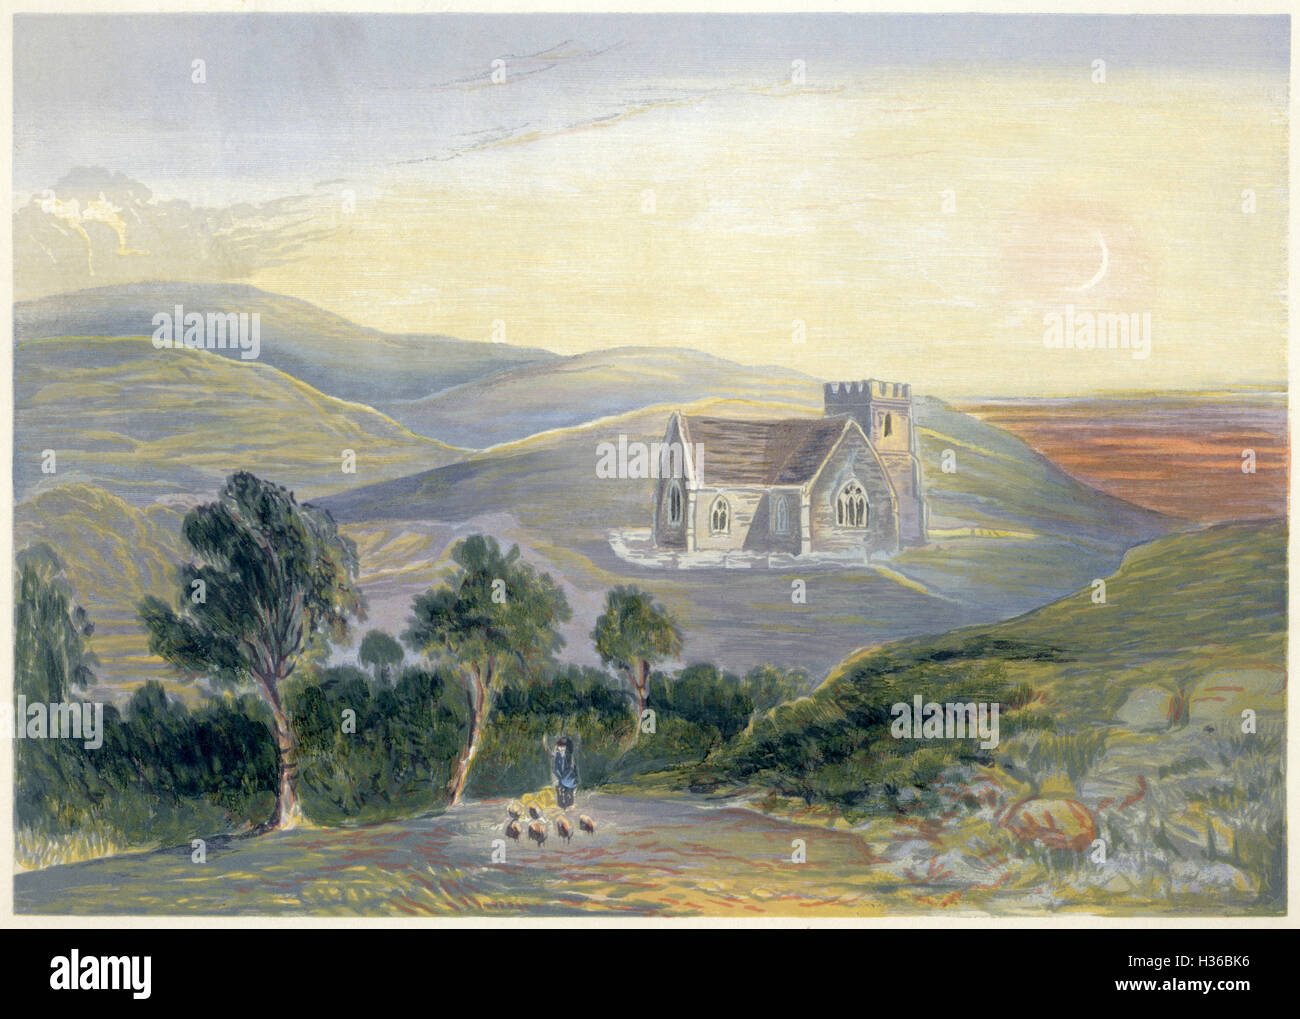 A watercolour painting entitled St Mary, Brook, Isle of Wight scanned at high resolution from a book printed in 1869. Believed copyright free. Stock Photo